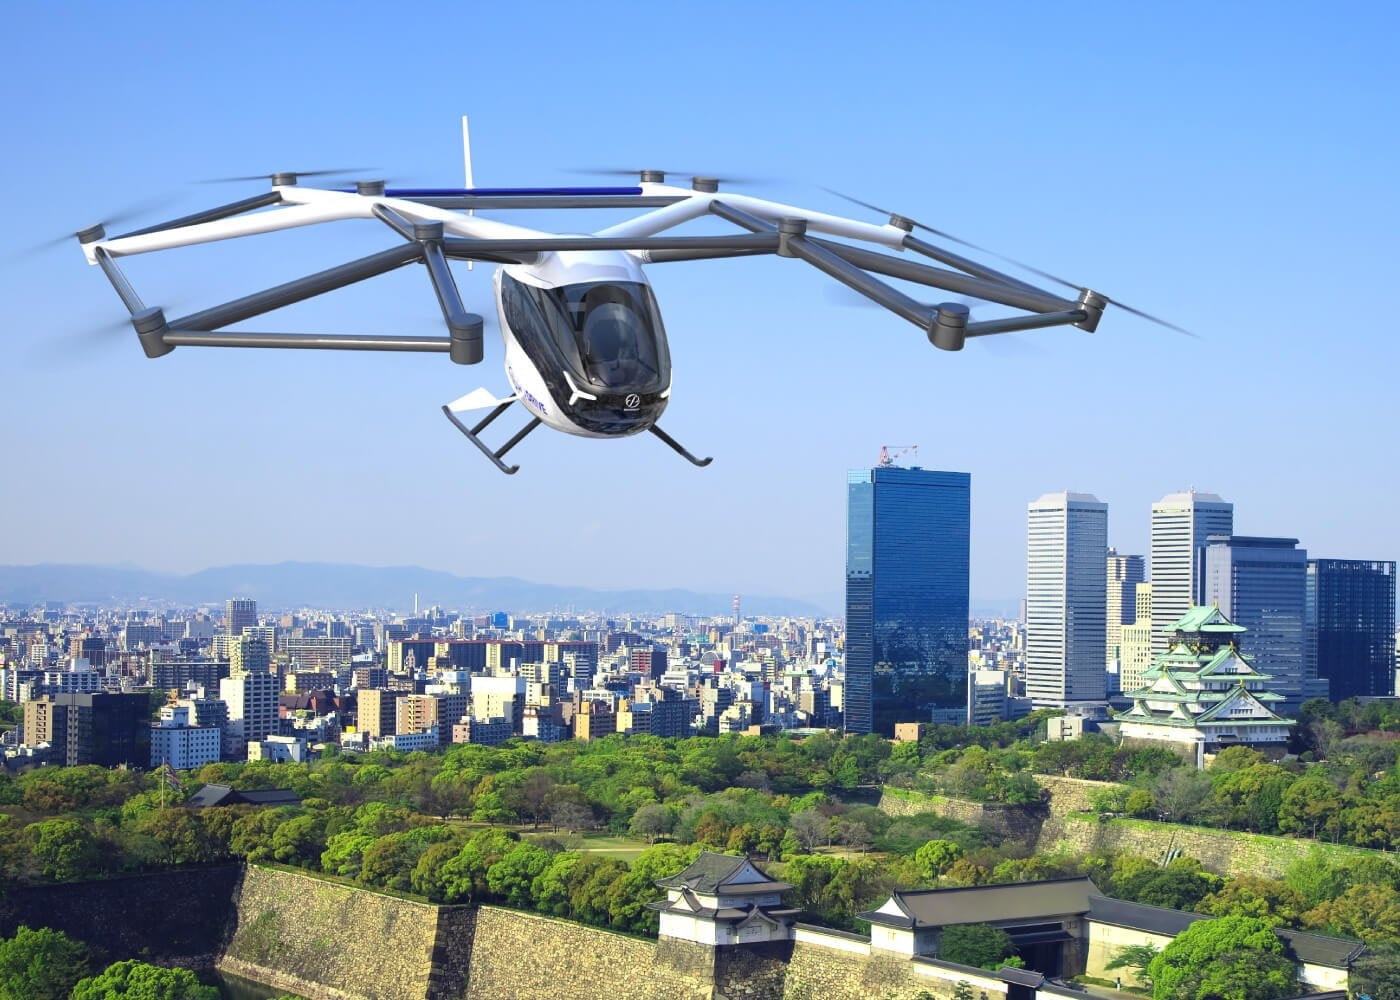 SkyDrive and Suzuki Partner for Commercial eVTOL Production